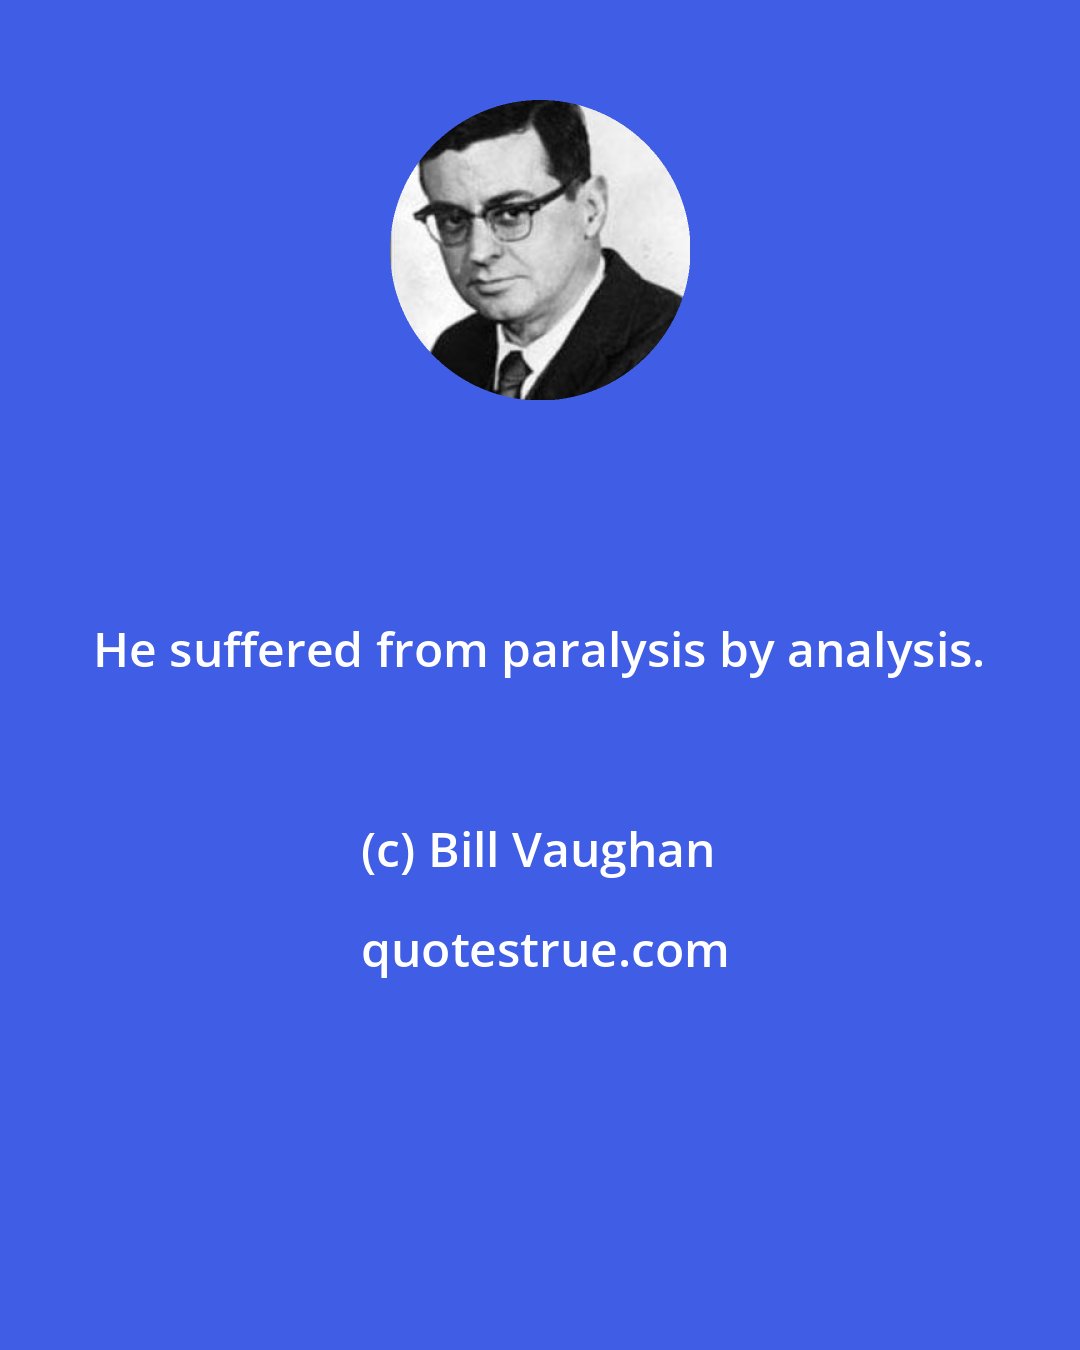 Bill Vaughan: He suffered from paralysis by analysis.